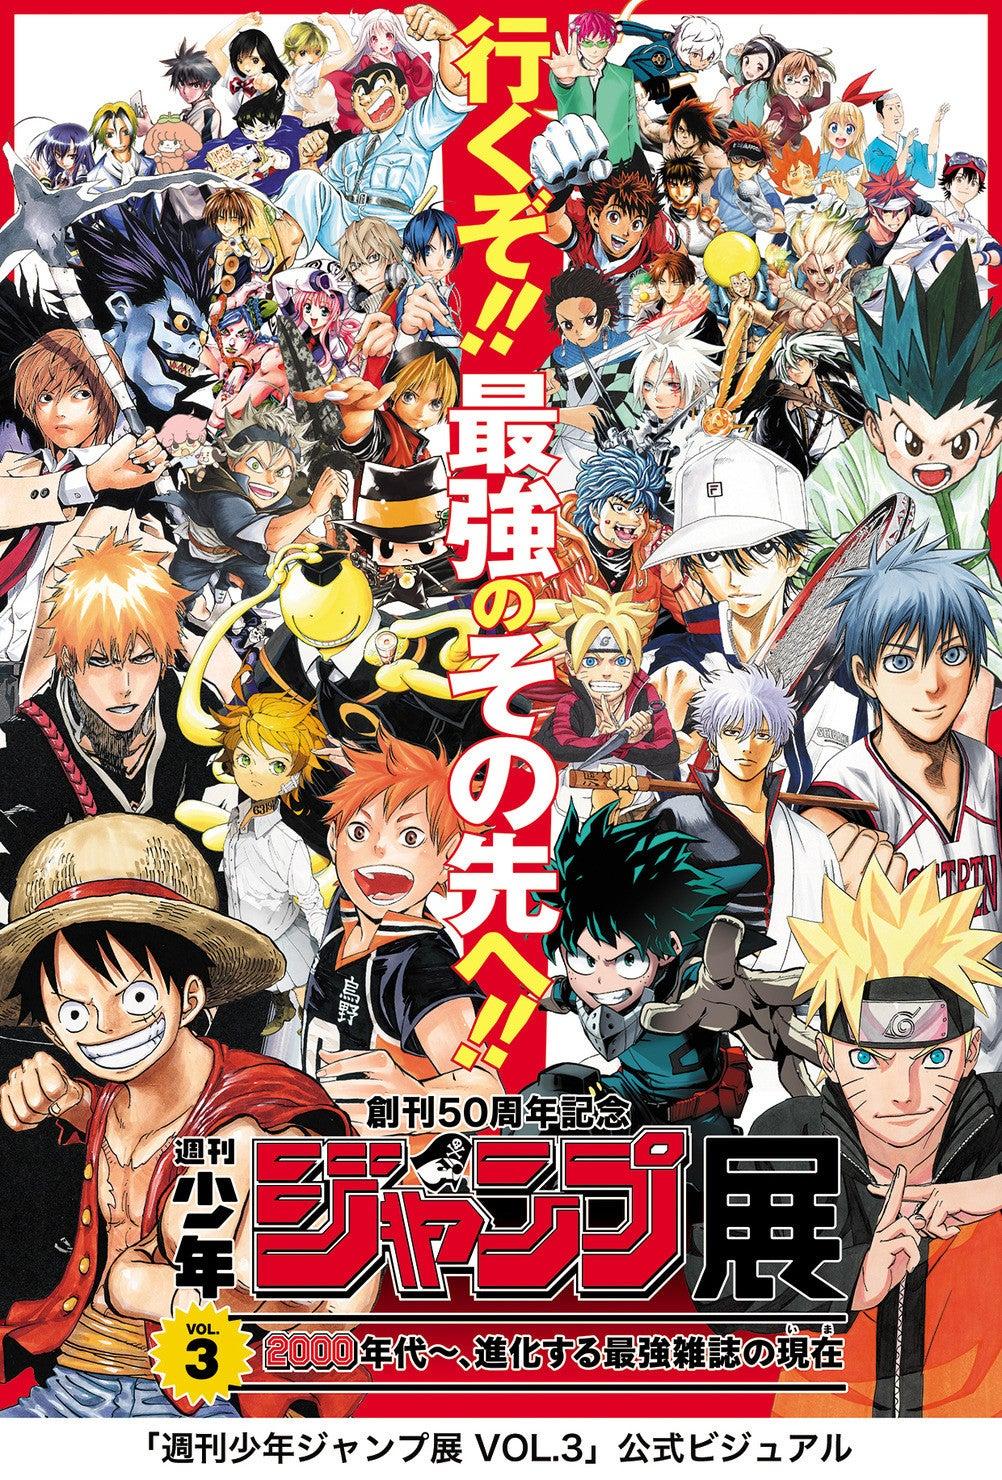 Japanese anime fans weigh in on which Shonen Jump anime are the most  entertaining  SoraNews24 Japan News